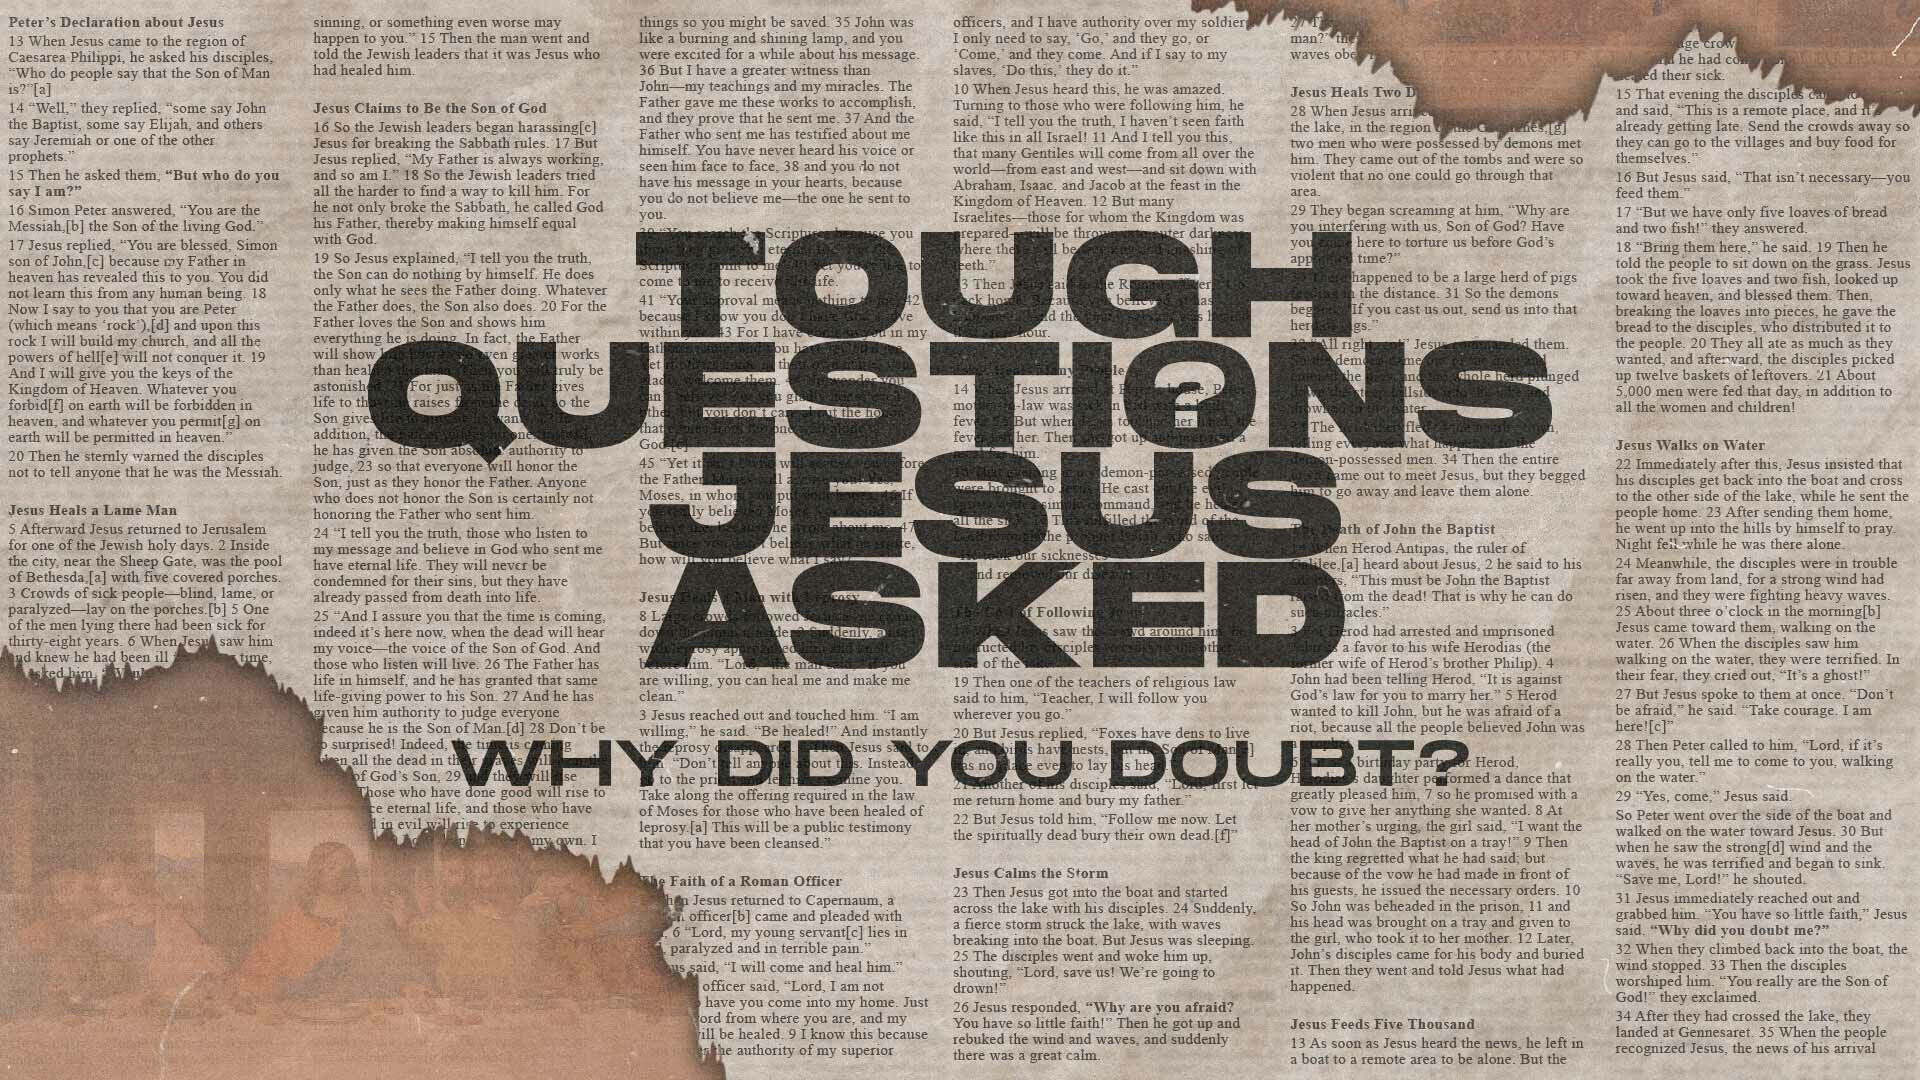 Why did you doubt?